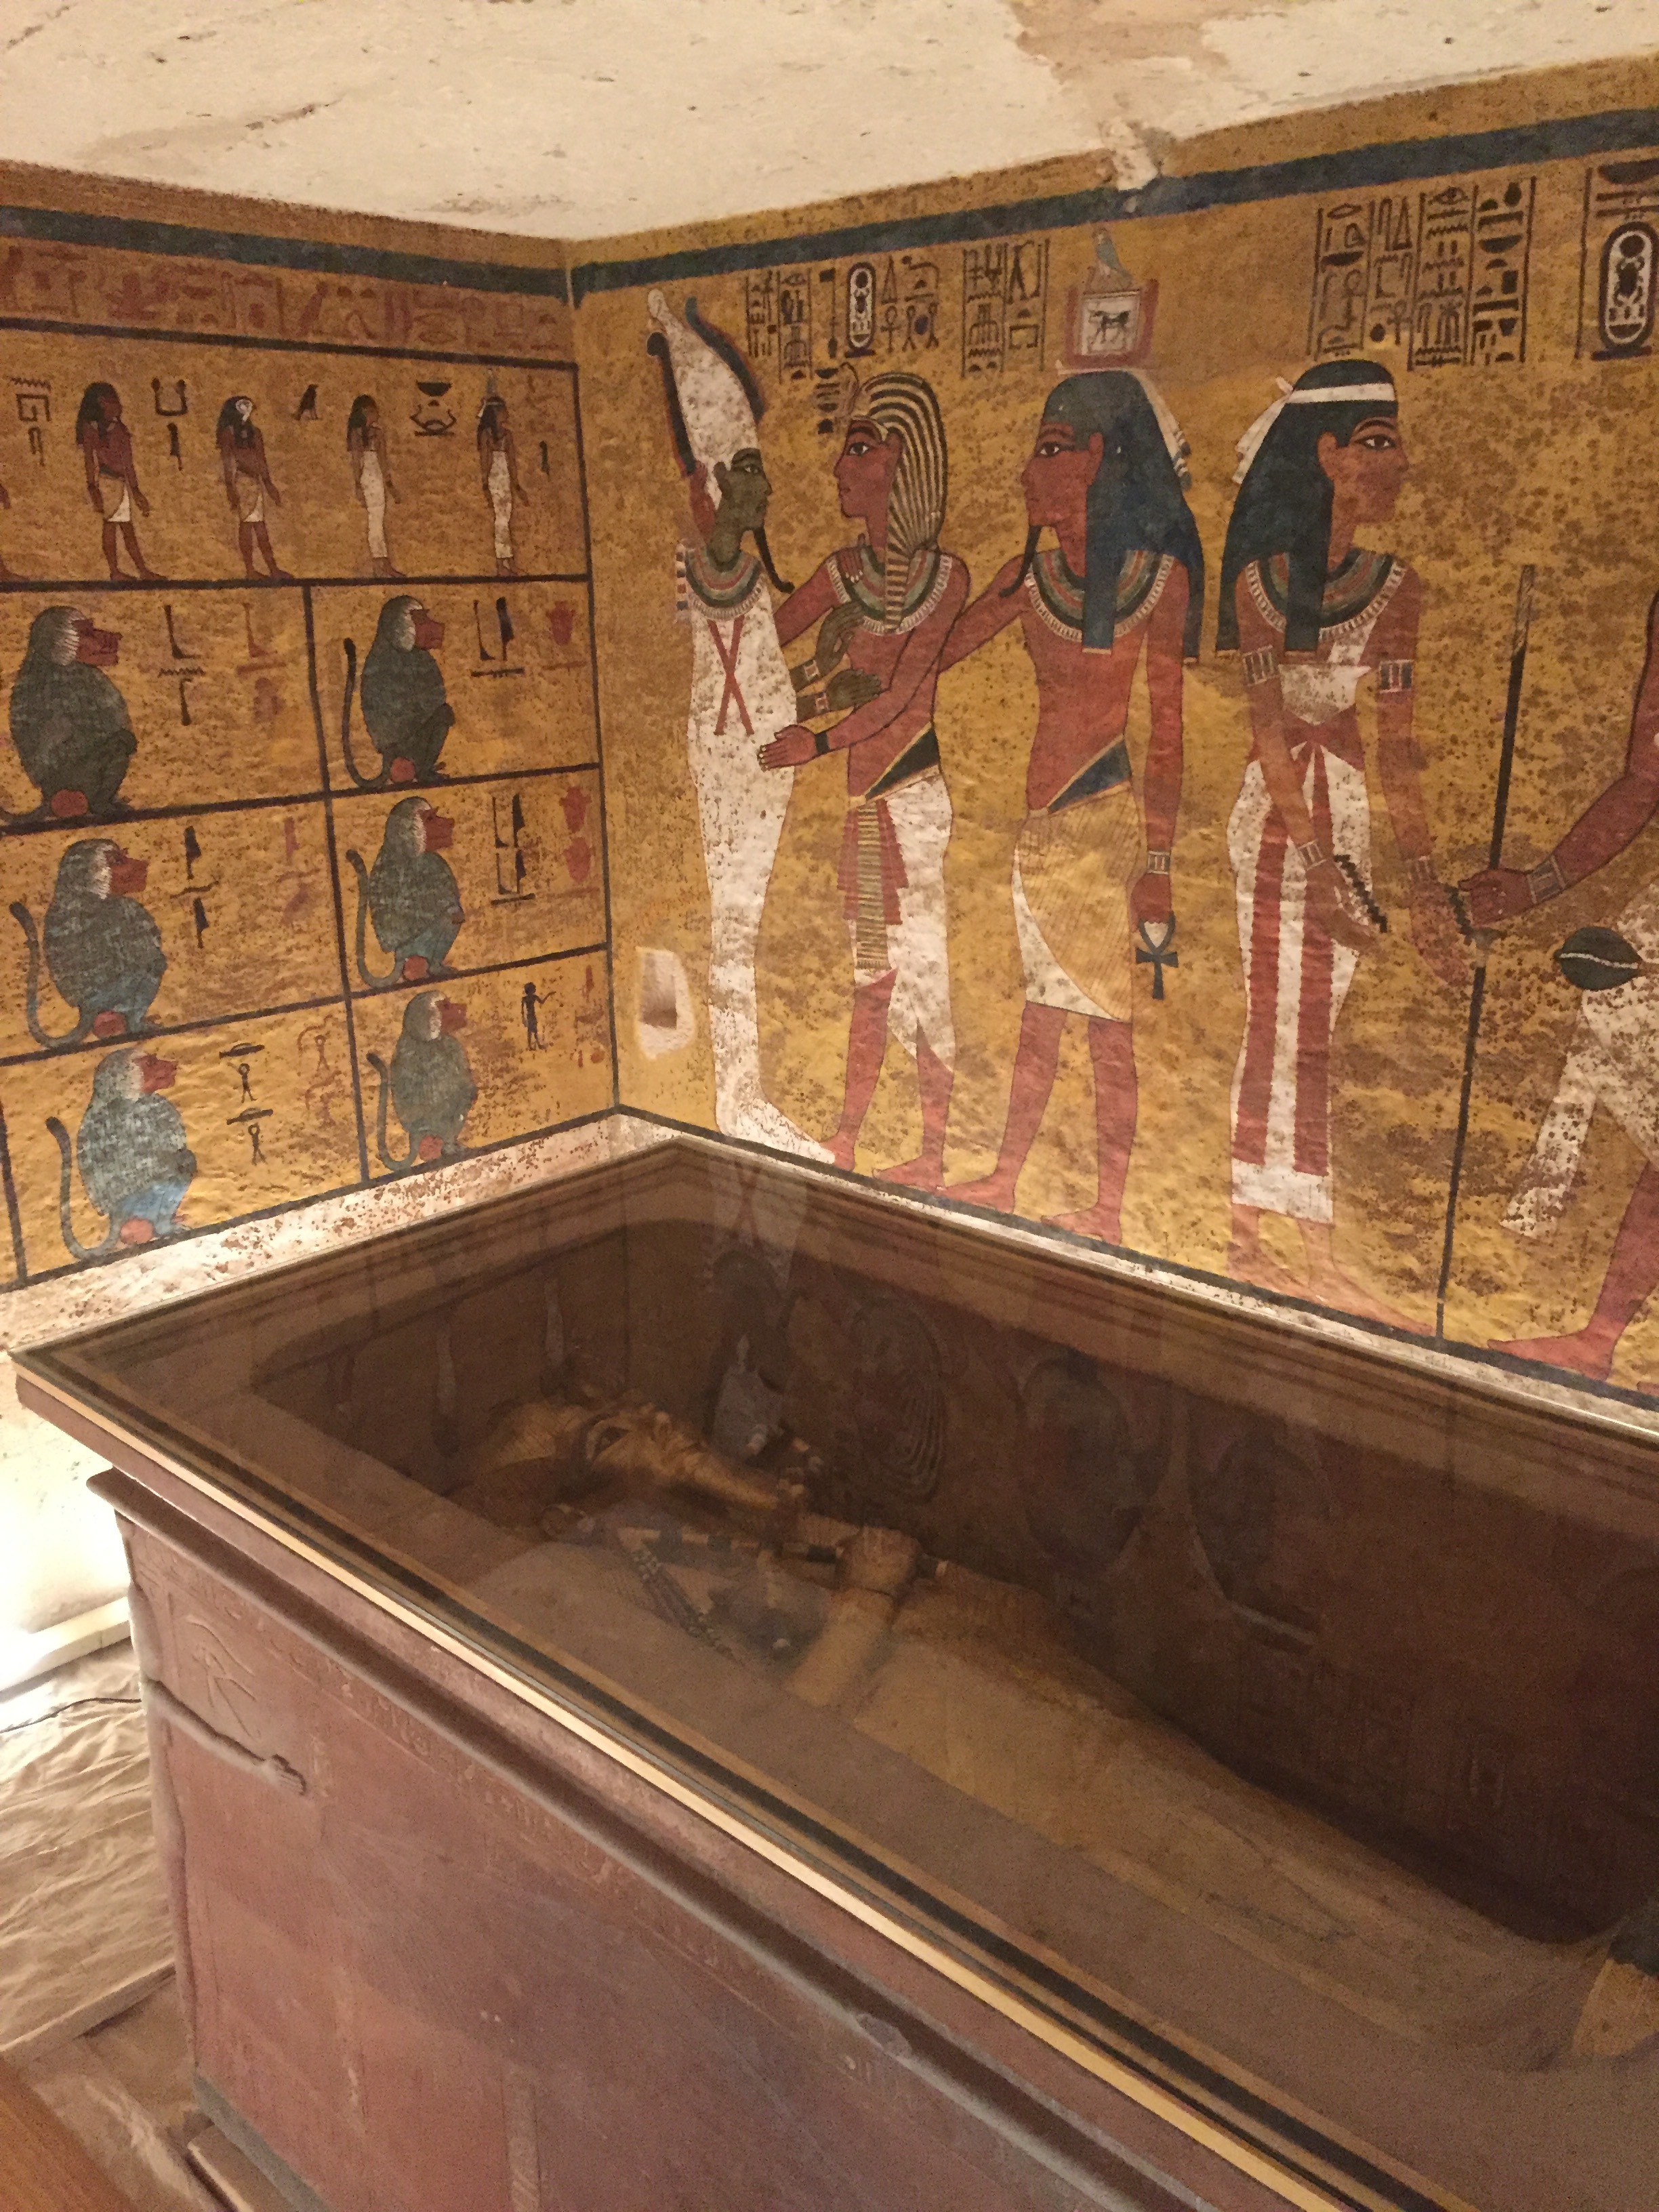  The original, carved and painted stone sarcophagus sits in its original position in the center of the burial chamber. It houses Tut's original, carved and gilded outermost wooden coffin.&nbsp;  Image © J. Paul Getty Trust, 2017 